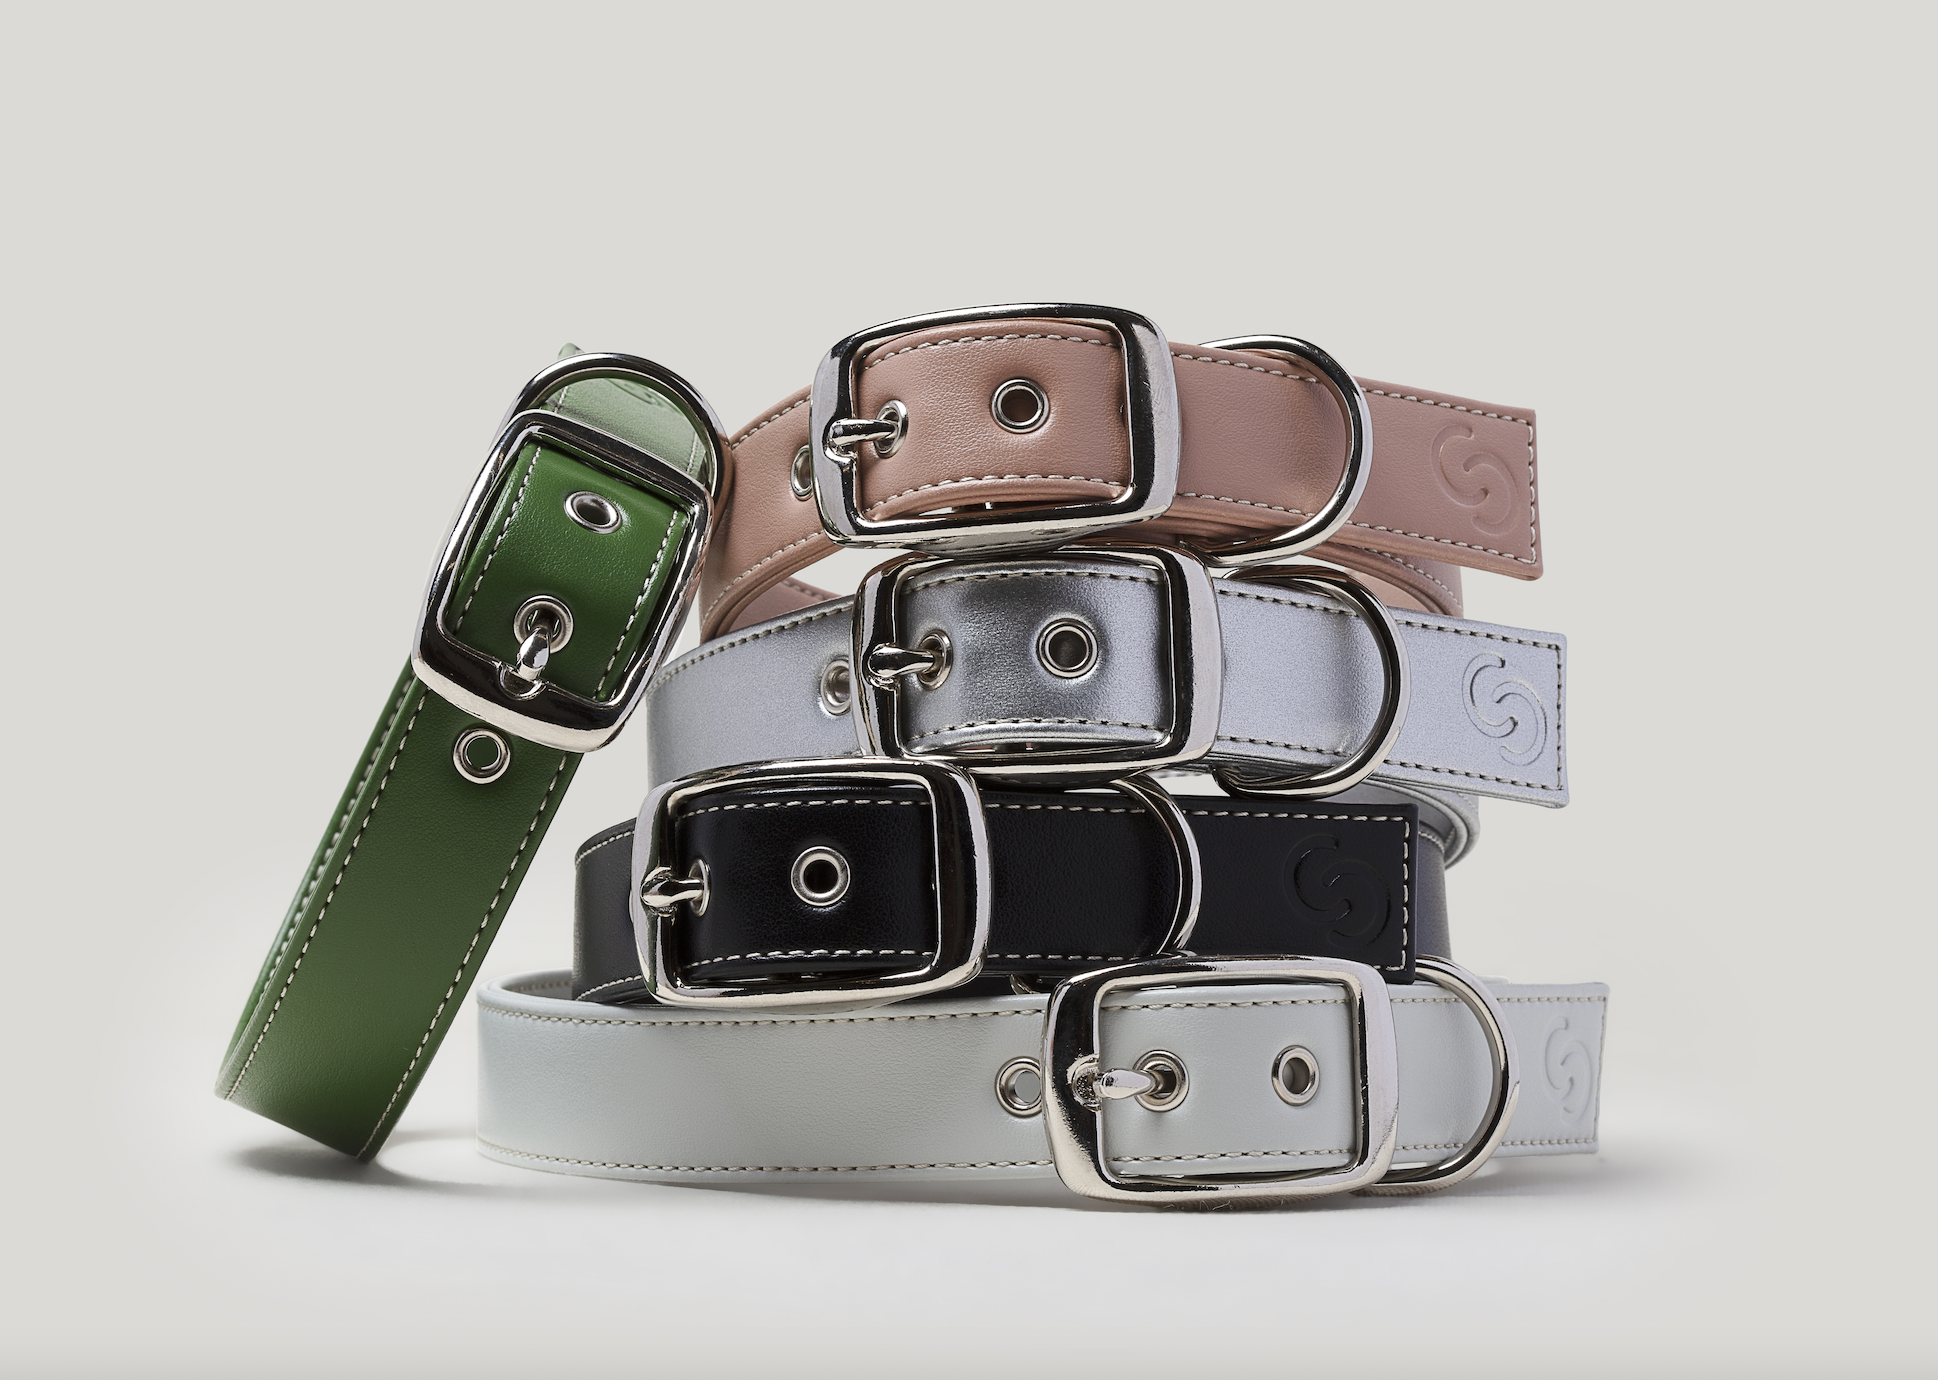 Artisan handmade dog collars and accessories available in blush pink, forest green, ice blue, black and silver